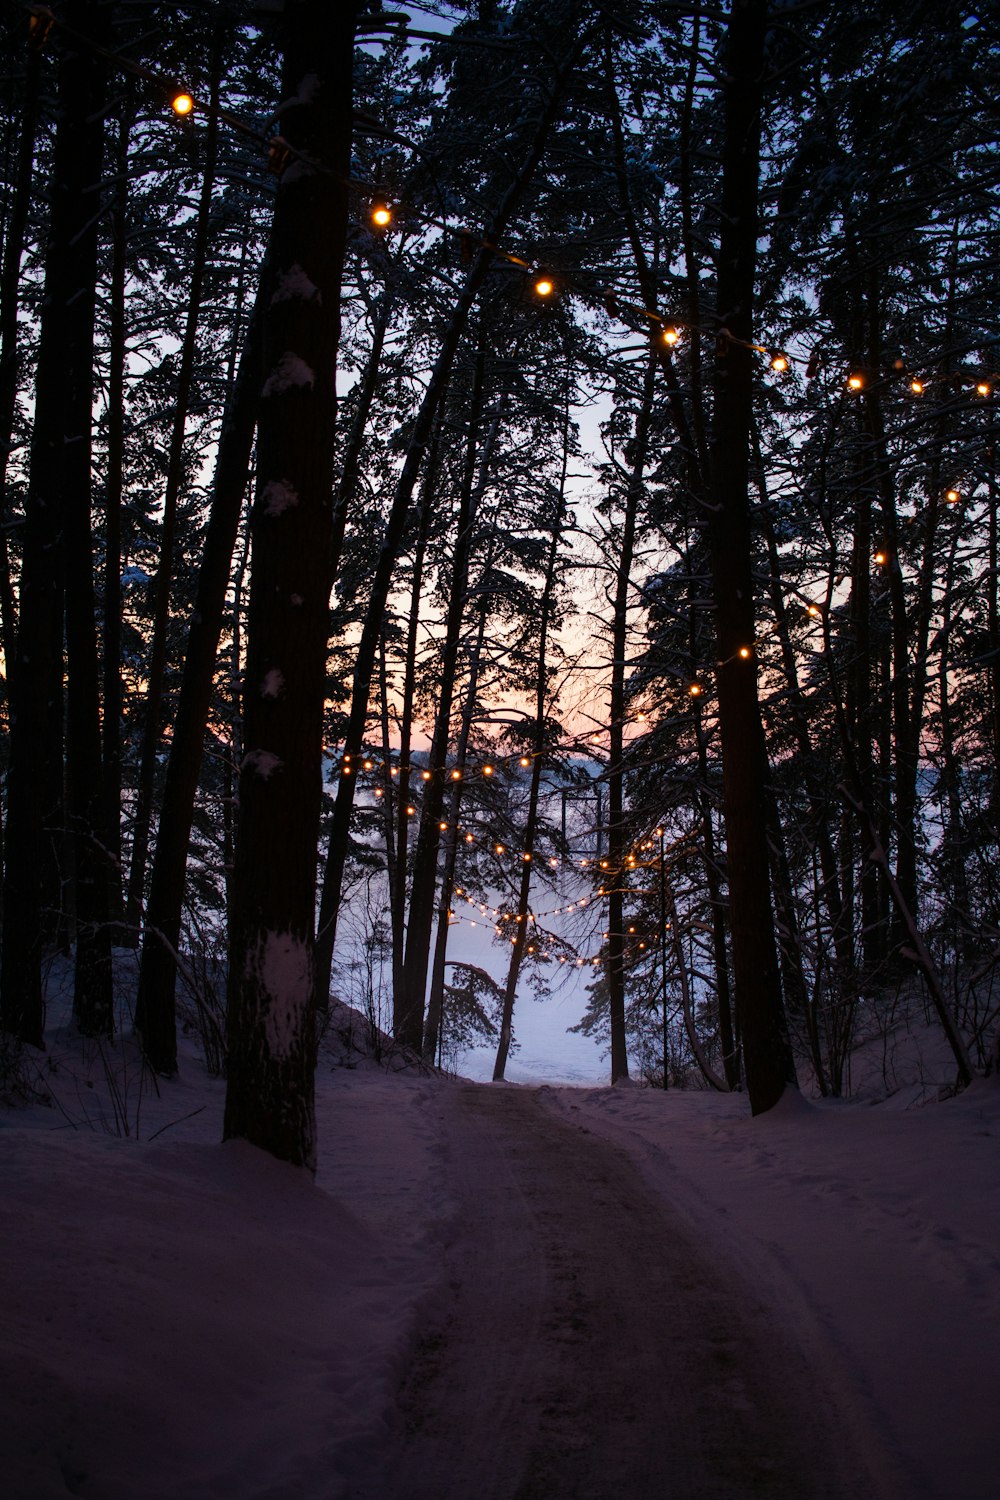 a path through a snowy forest with lights strung from the trees